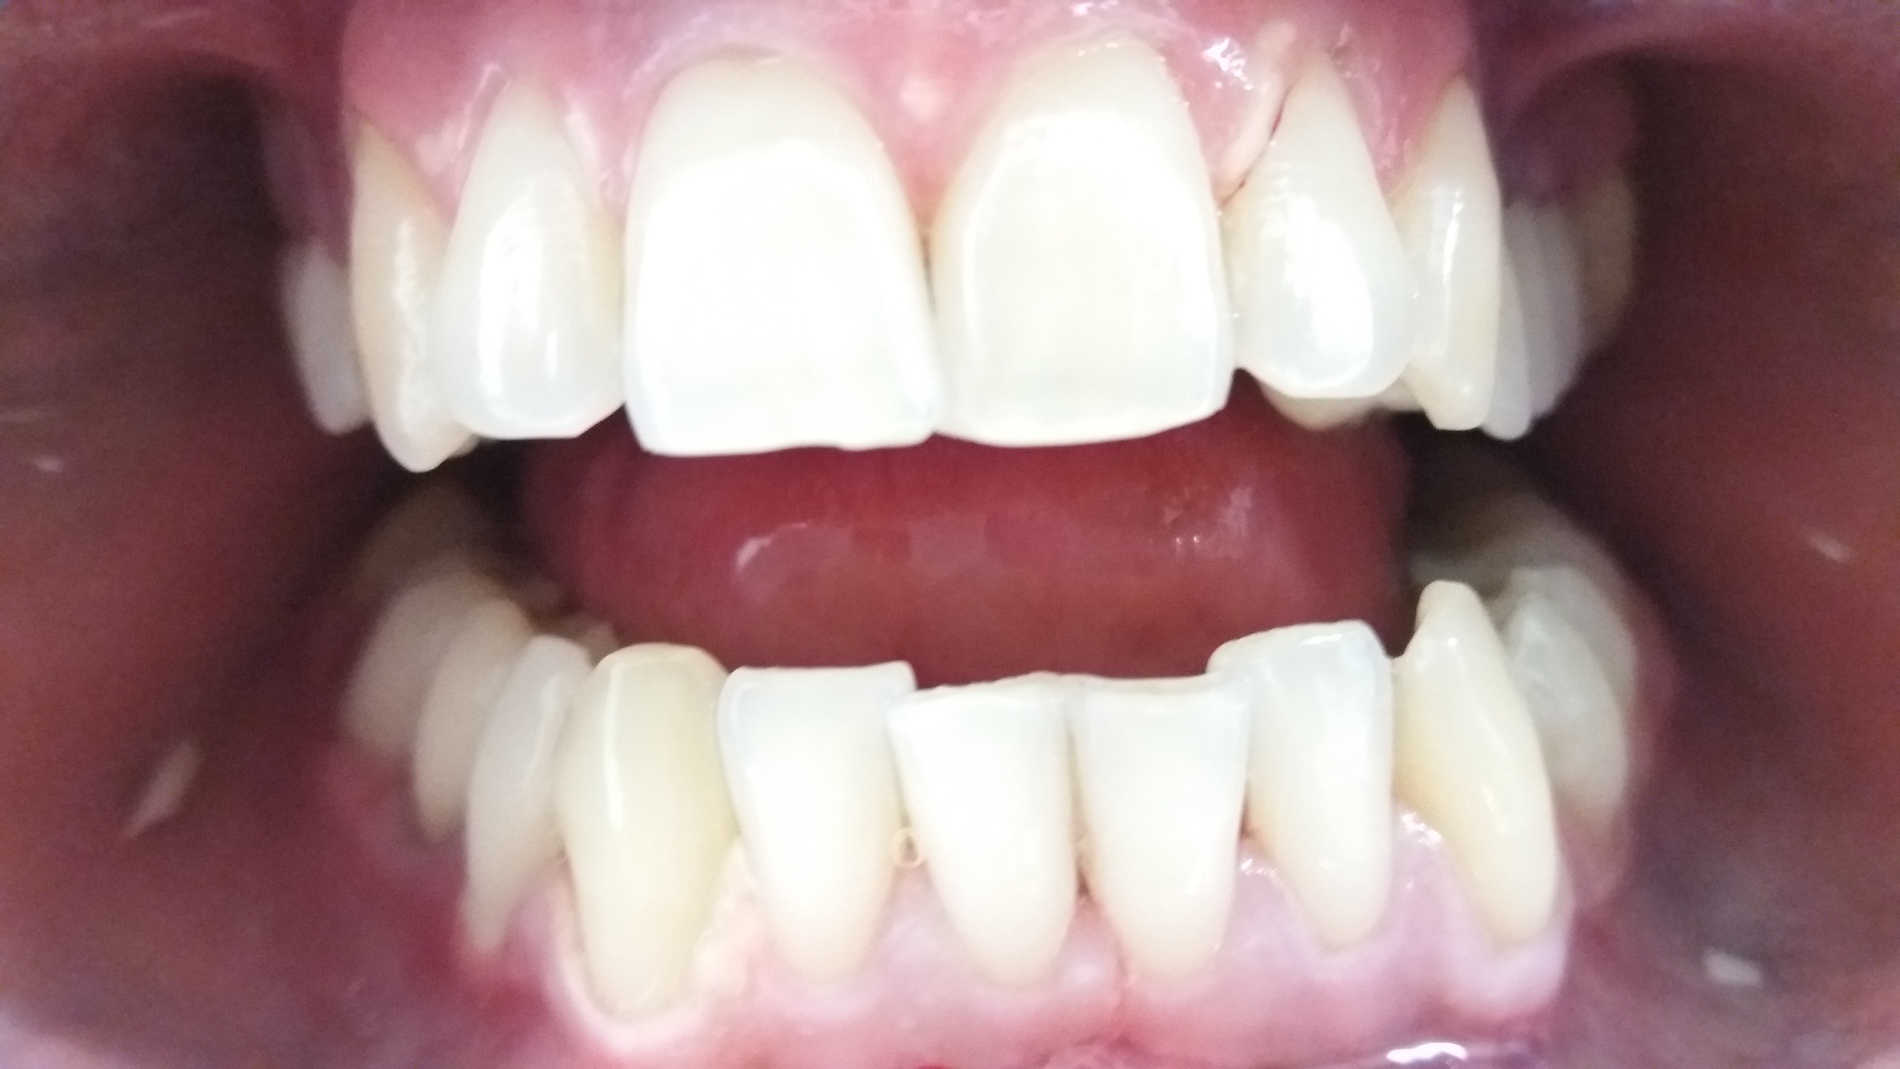 patient no.3: Teeth whitening-After